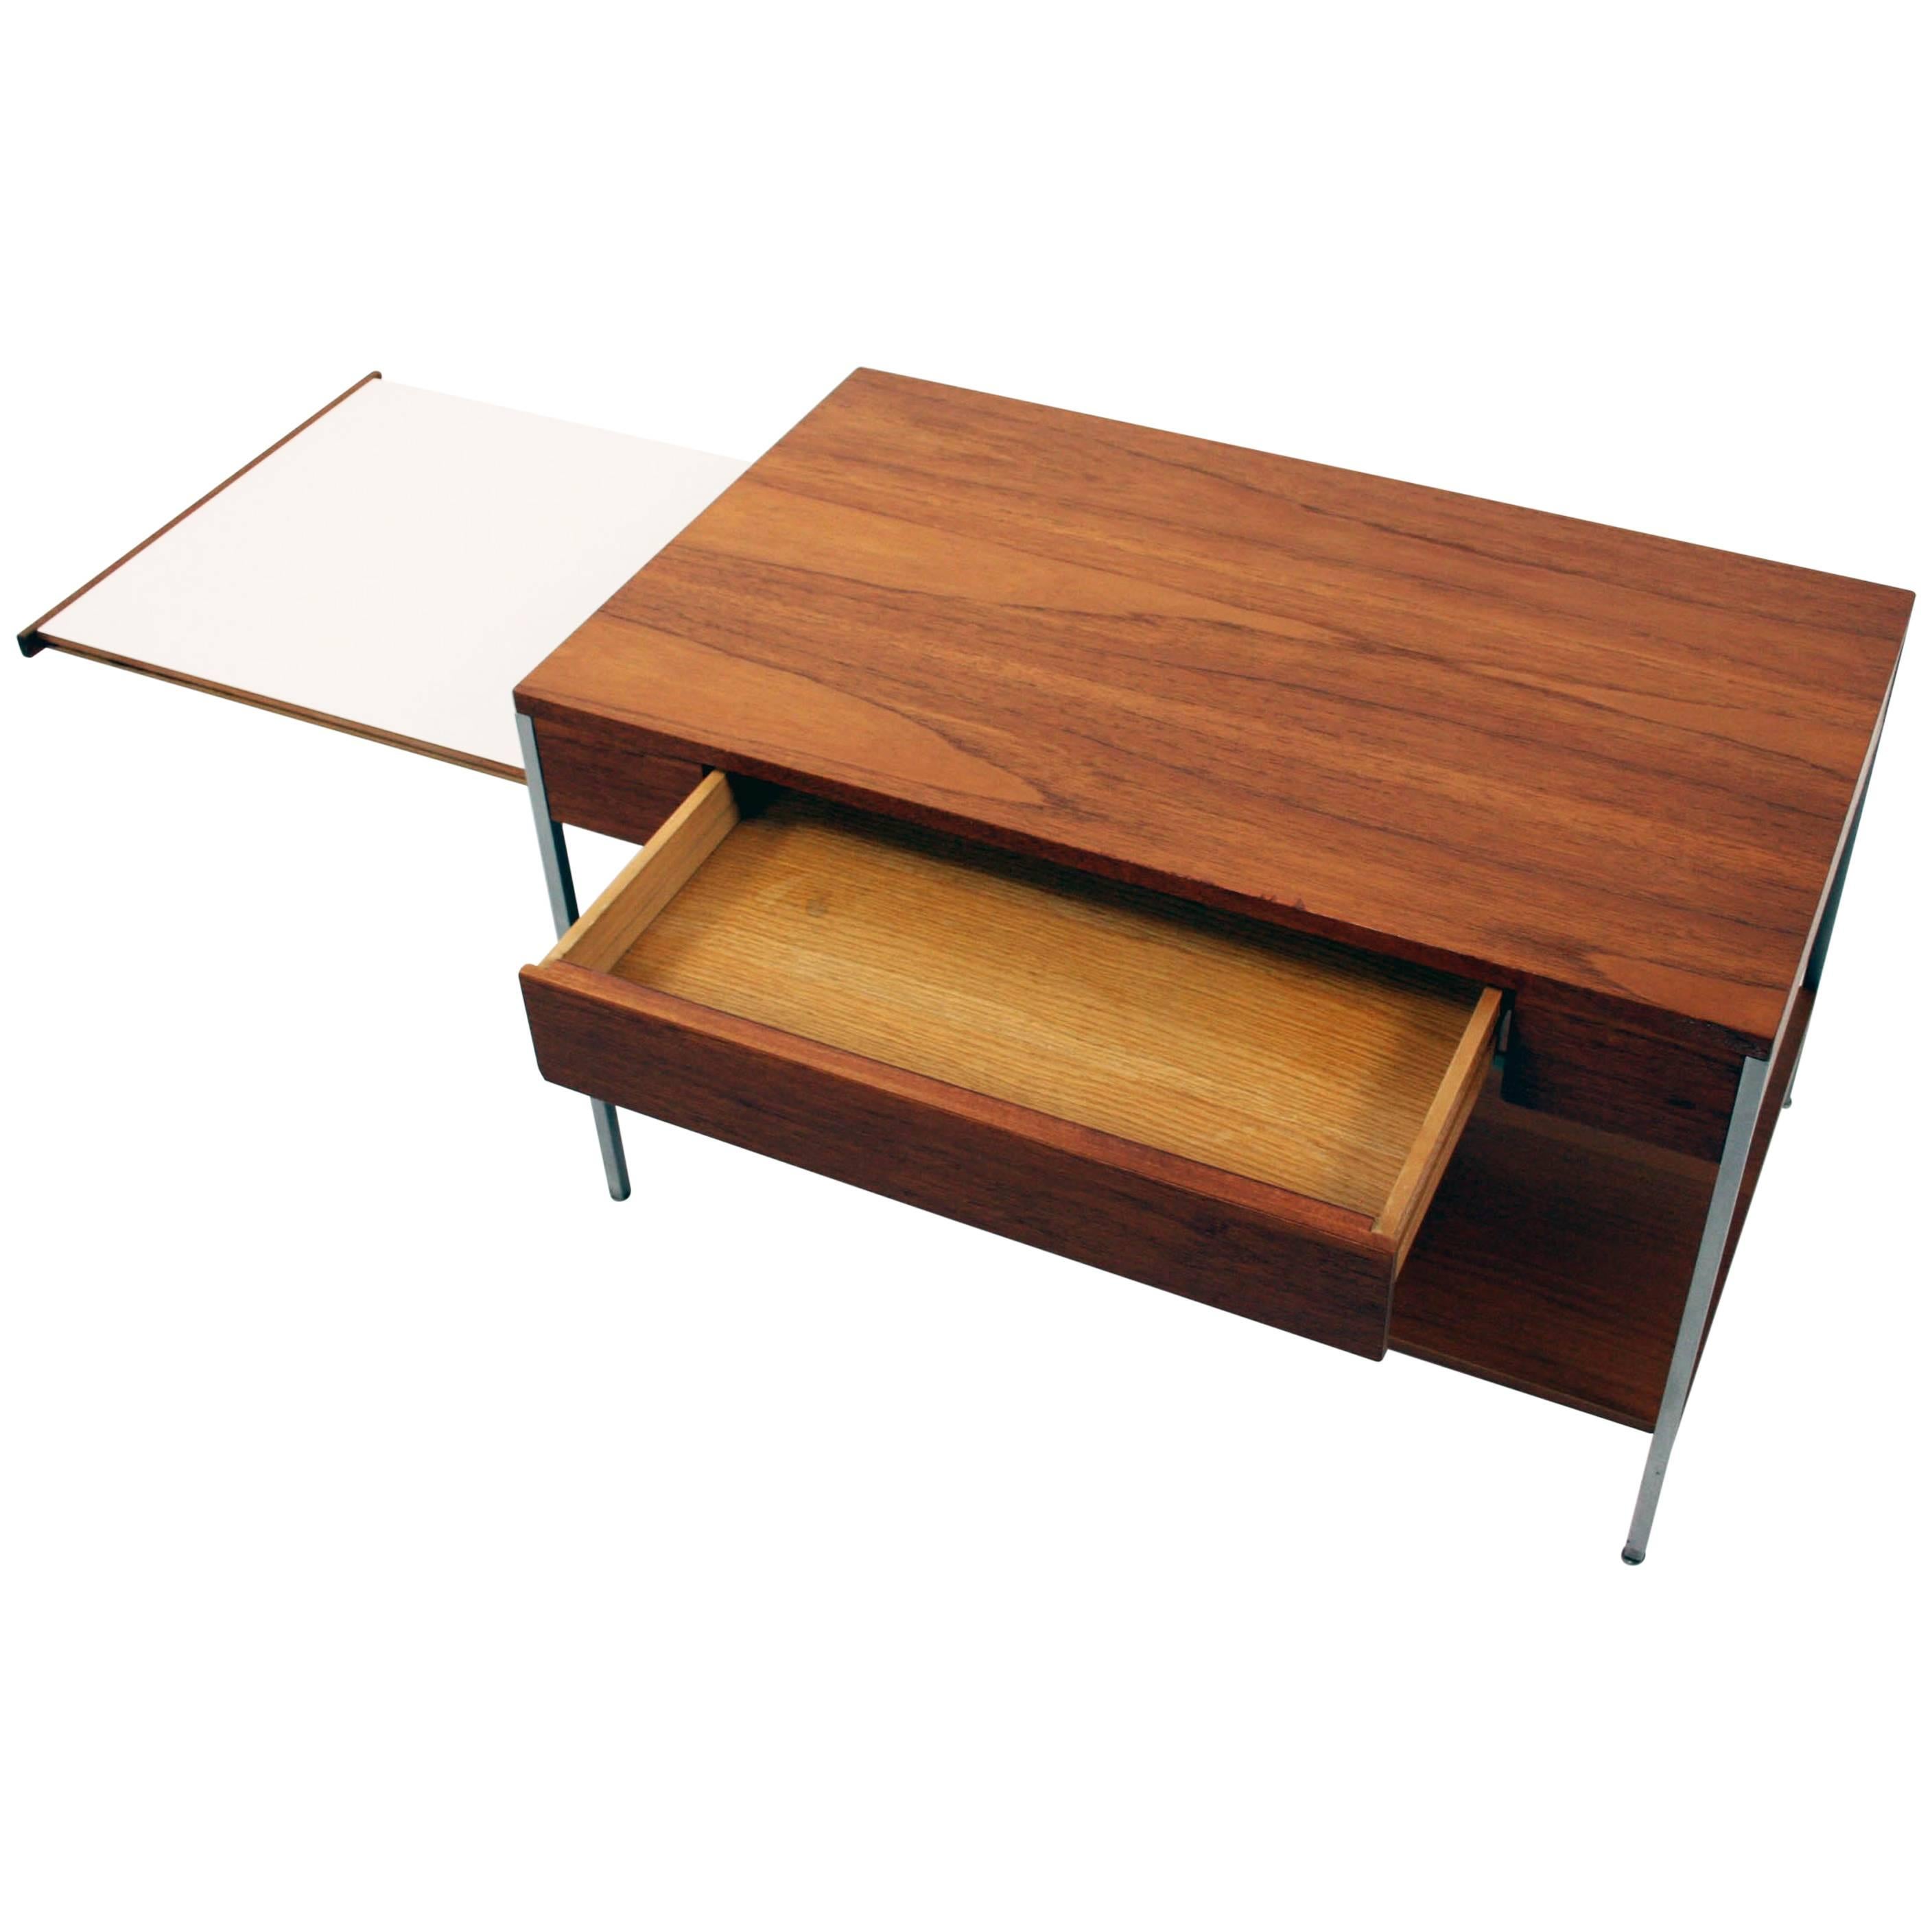 Original Walnut Side Table by George Nelson for Herman Miller